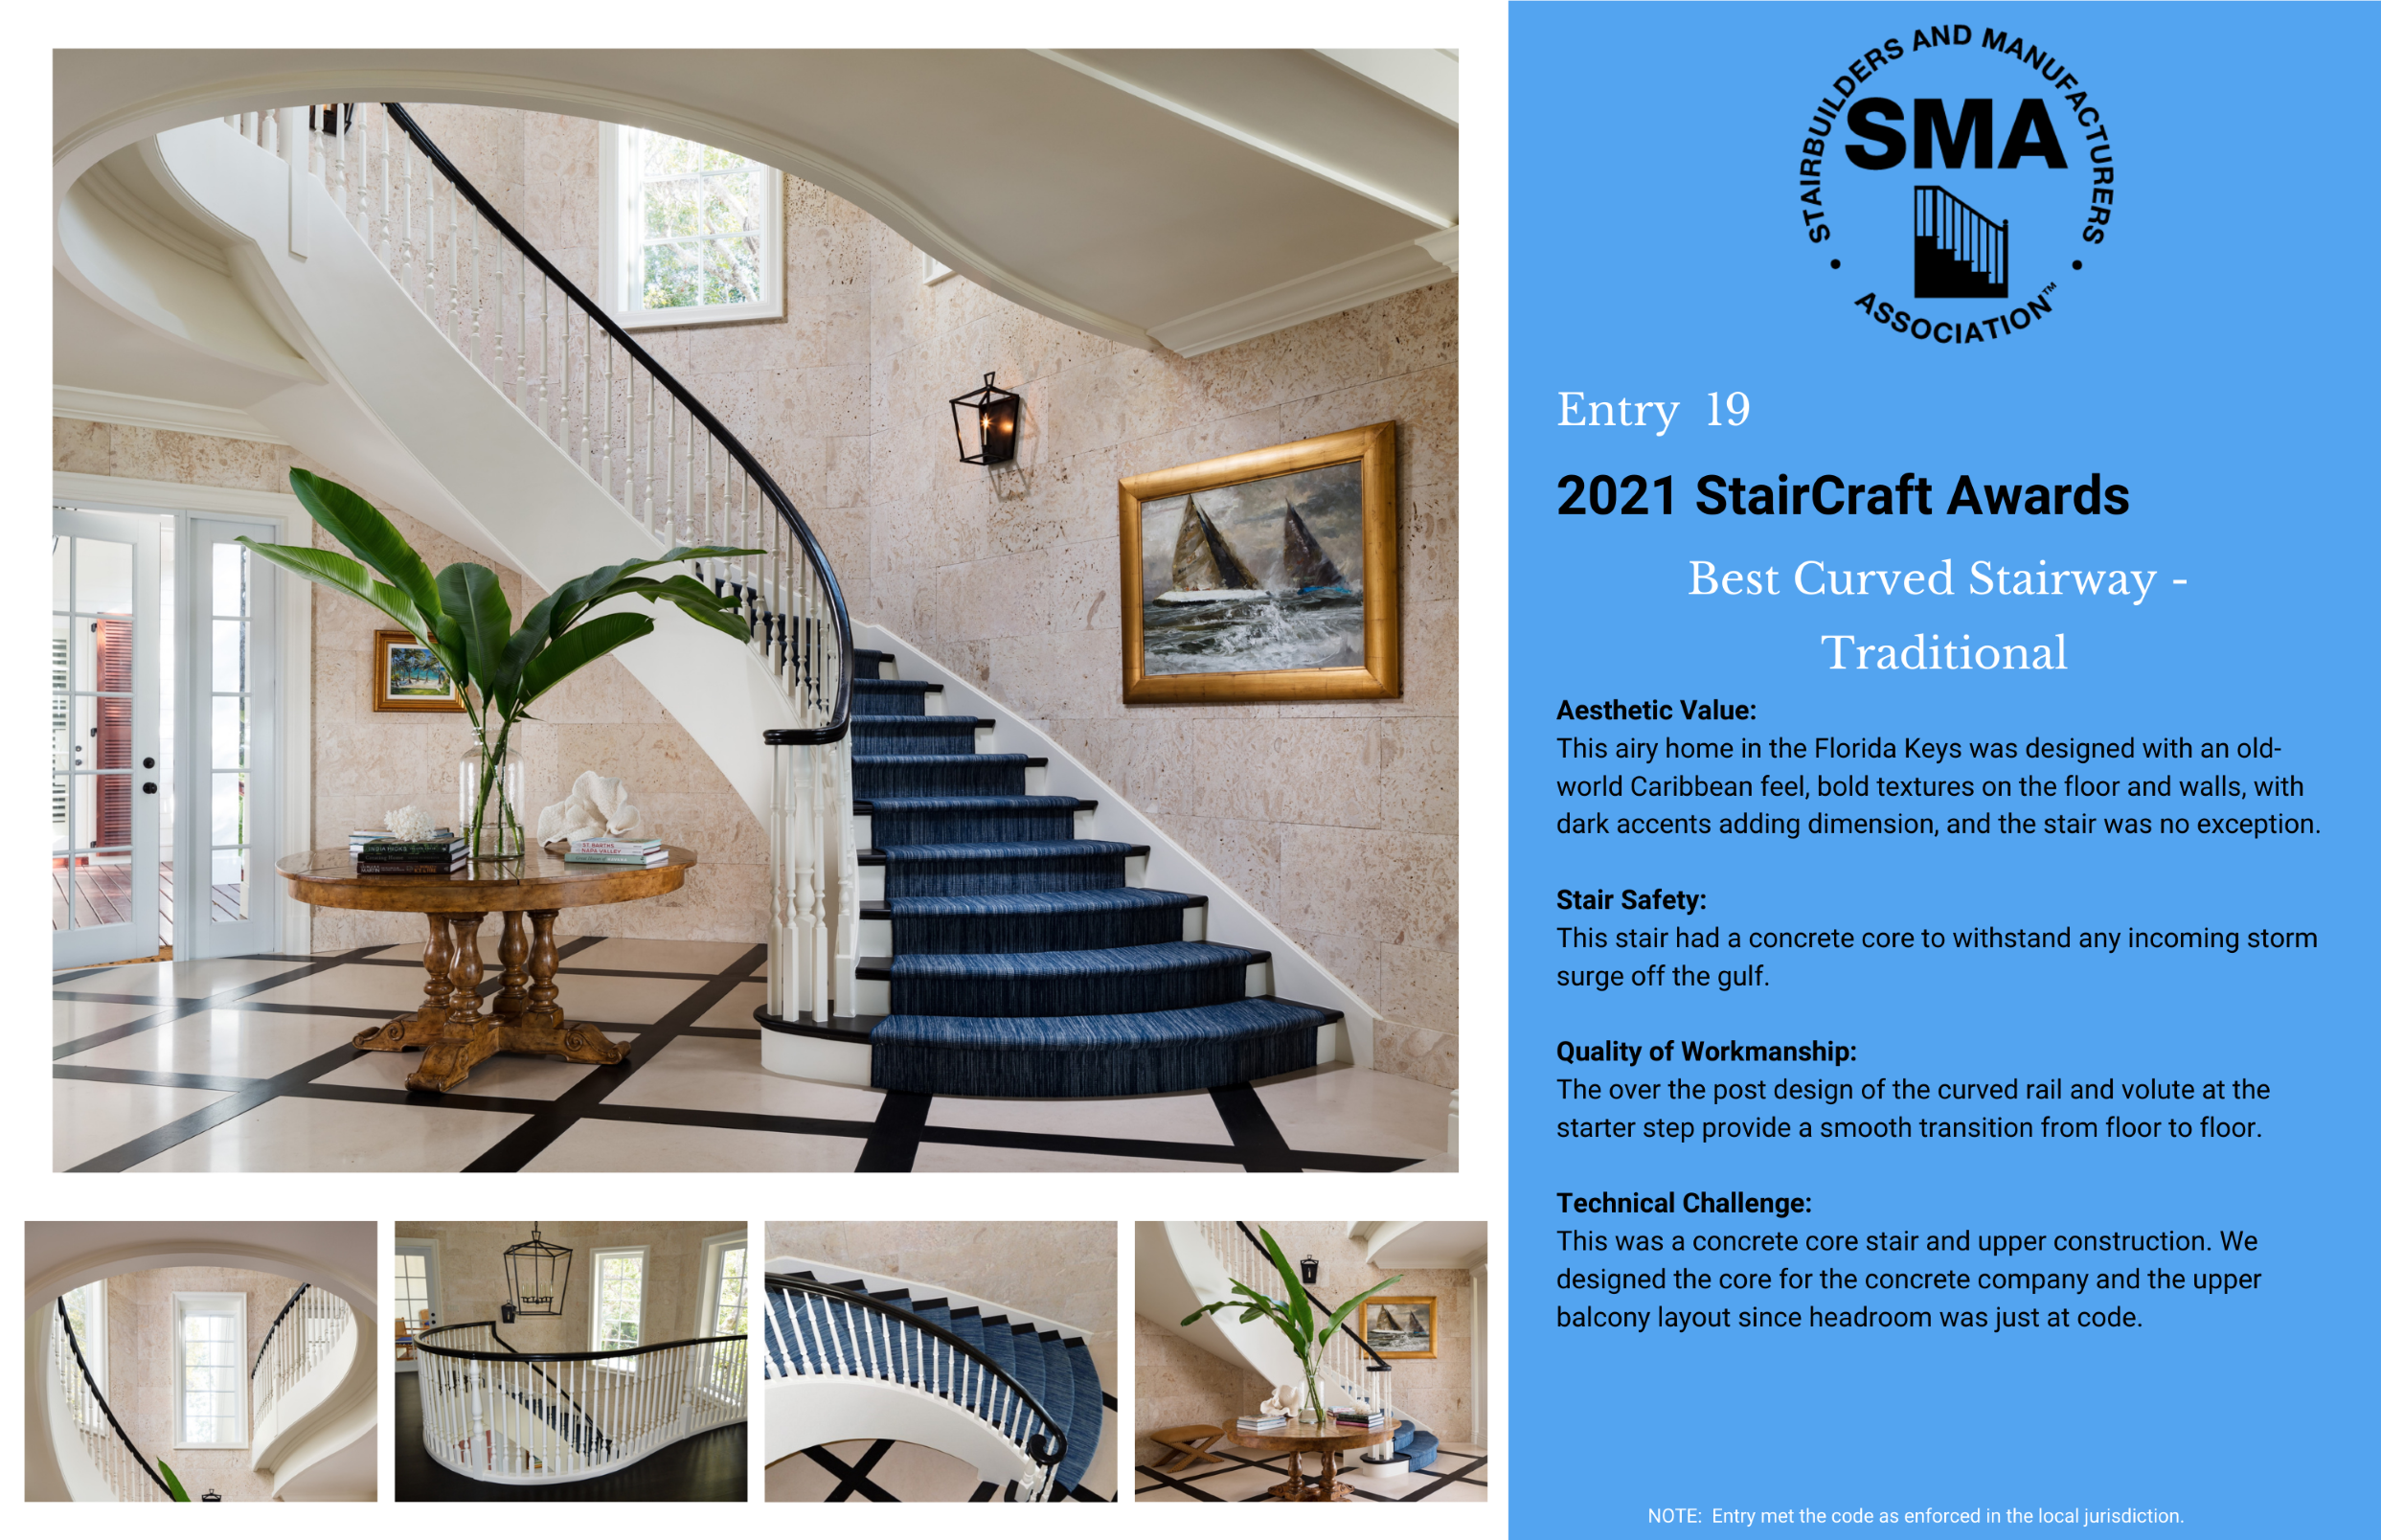 2021 StairCraft Awards Entry 19